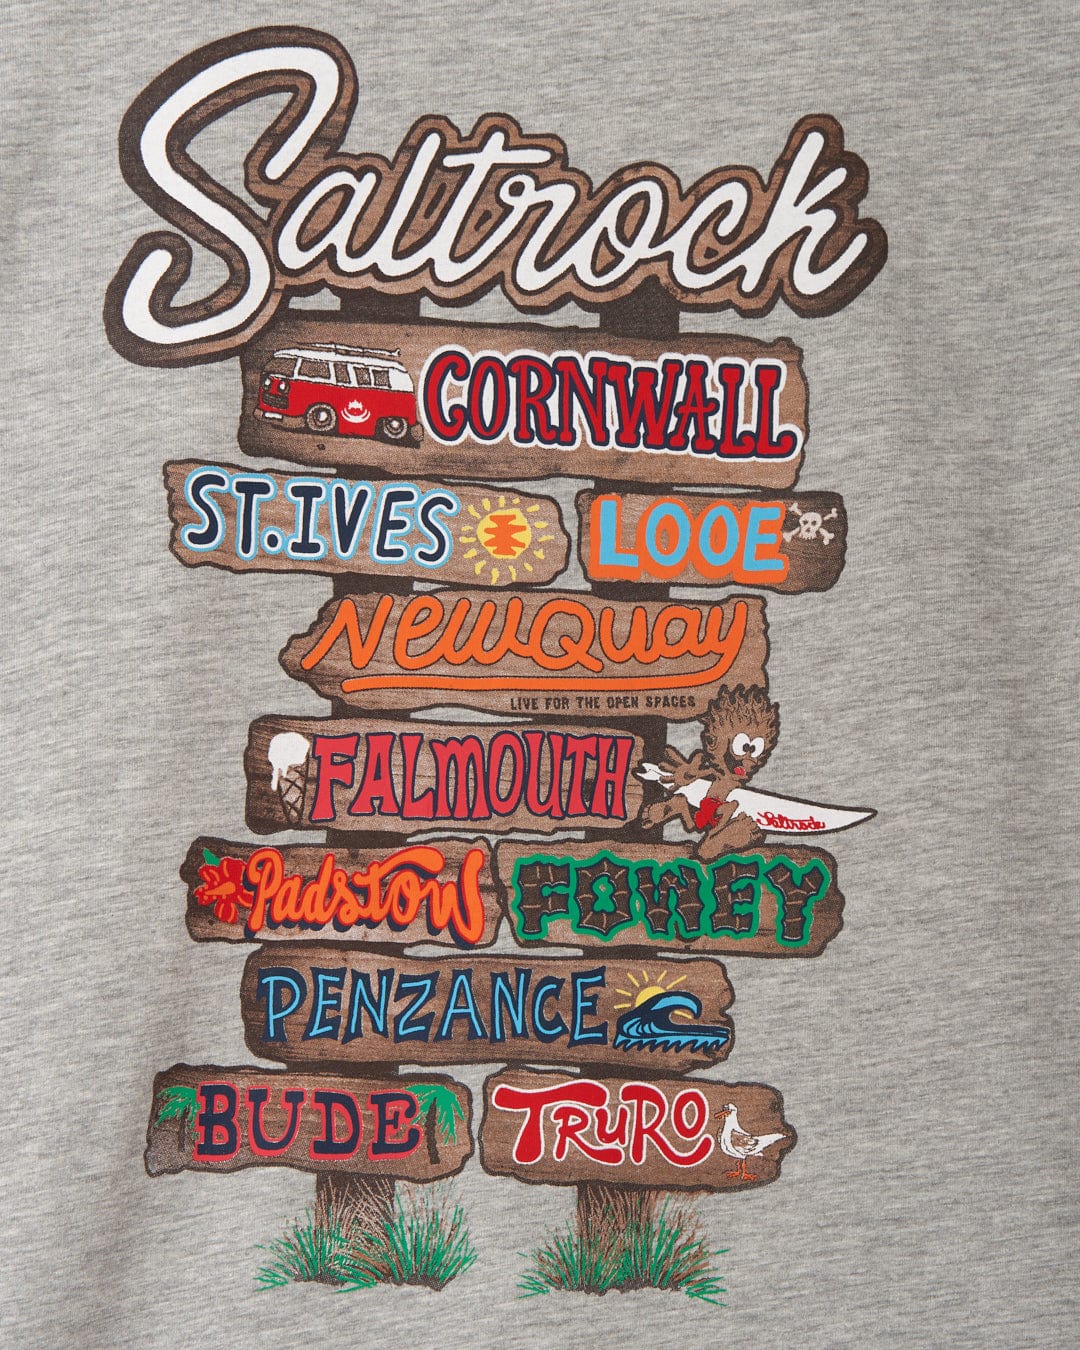 A Beach Signs Cornwall - Mens Short Sleeve T-Shirt - Grey Marl with the Saltrock branding and "Cornwall" printed on it.